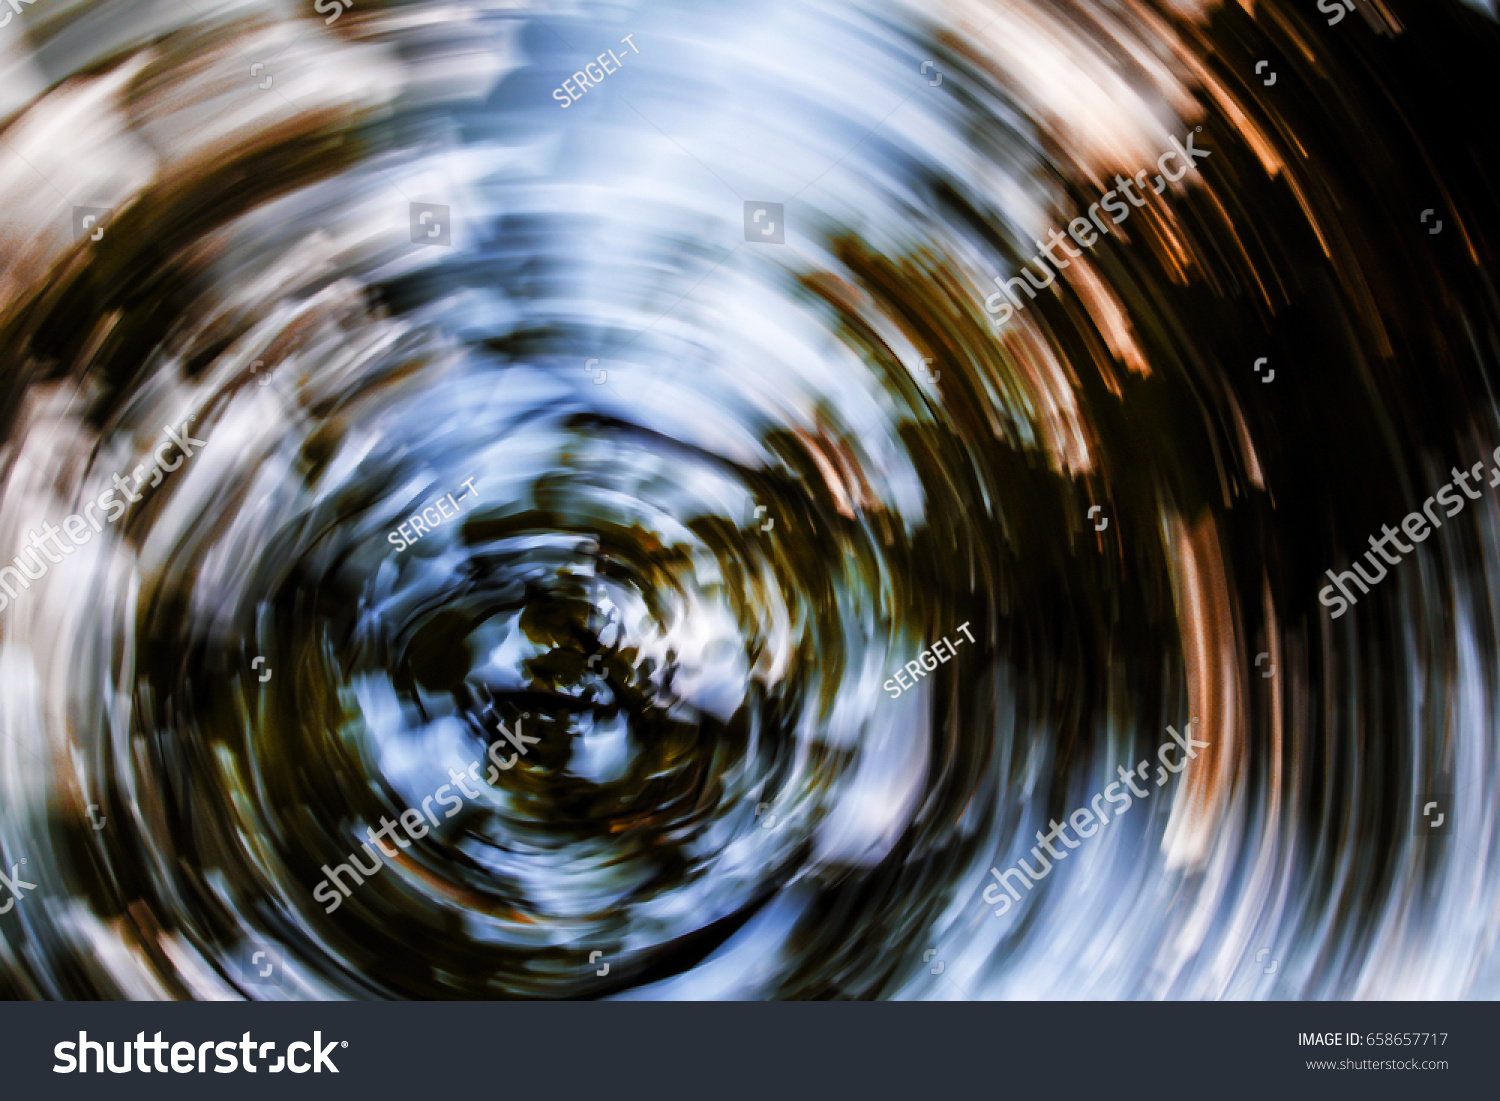 Autumn leaves in radial motion,circular motion,circular rotation of the camera,blur in a circular motion #658657717